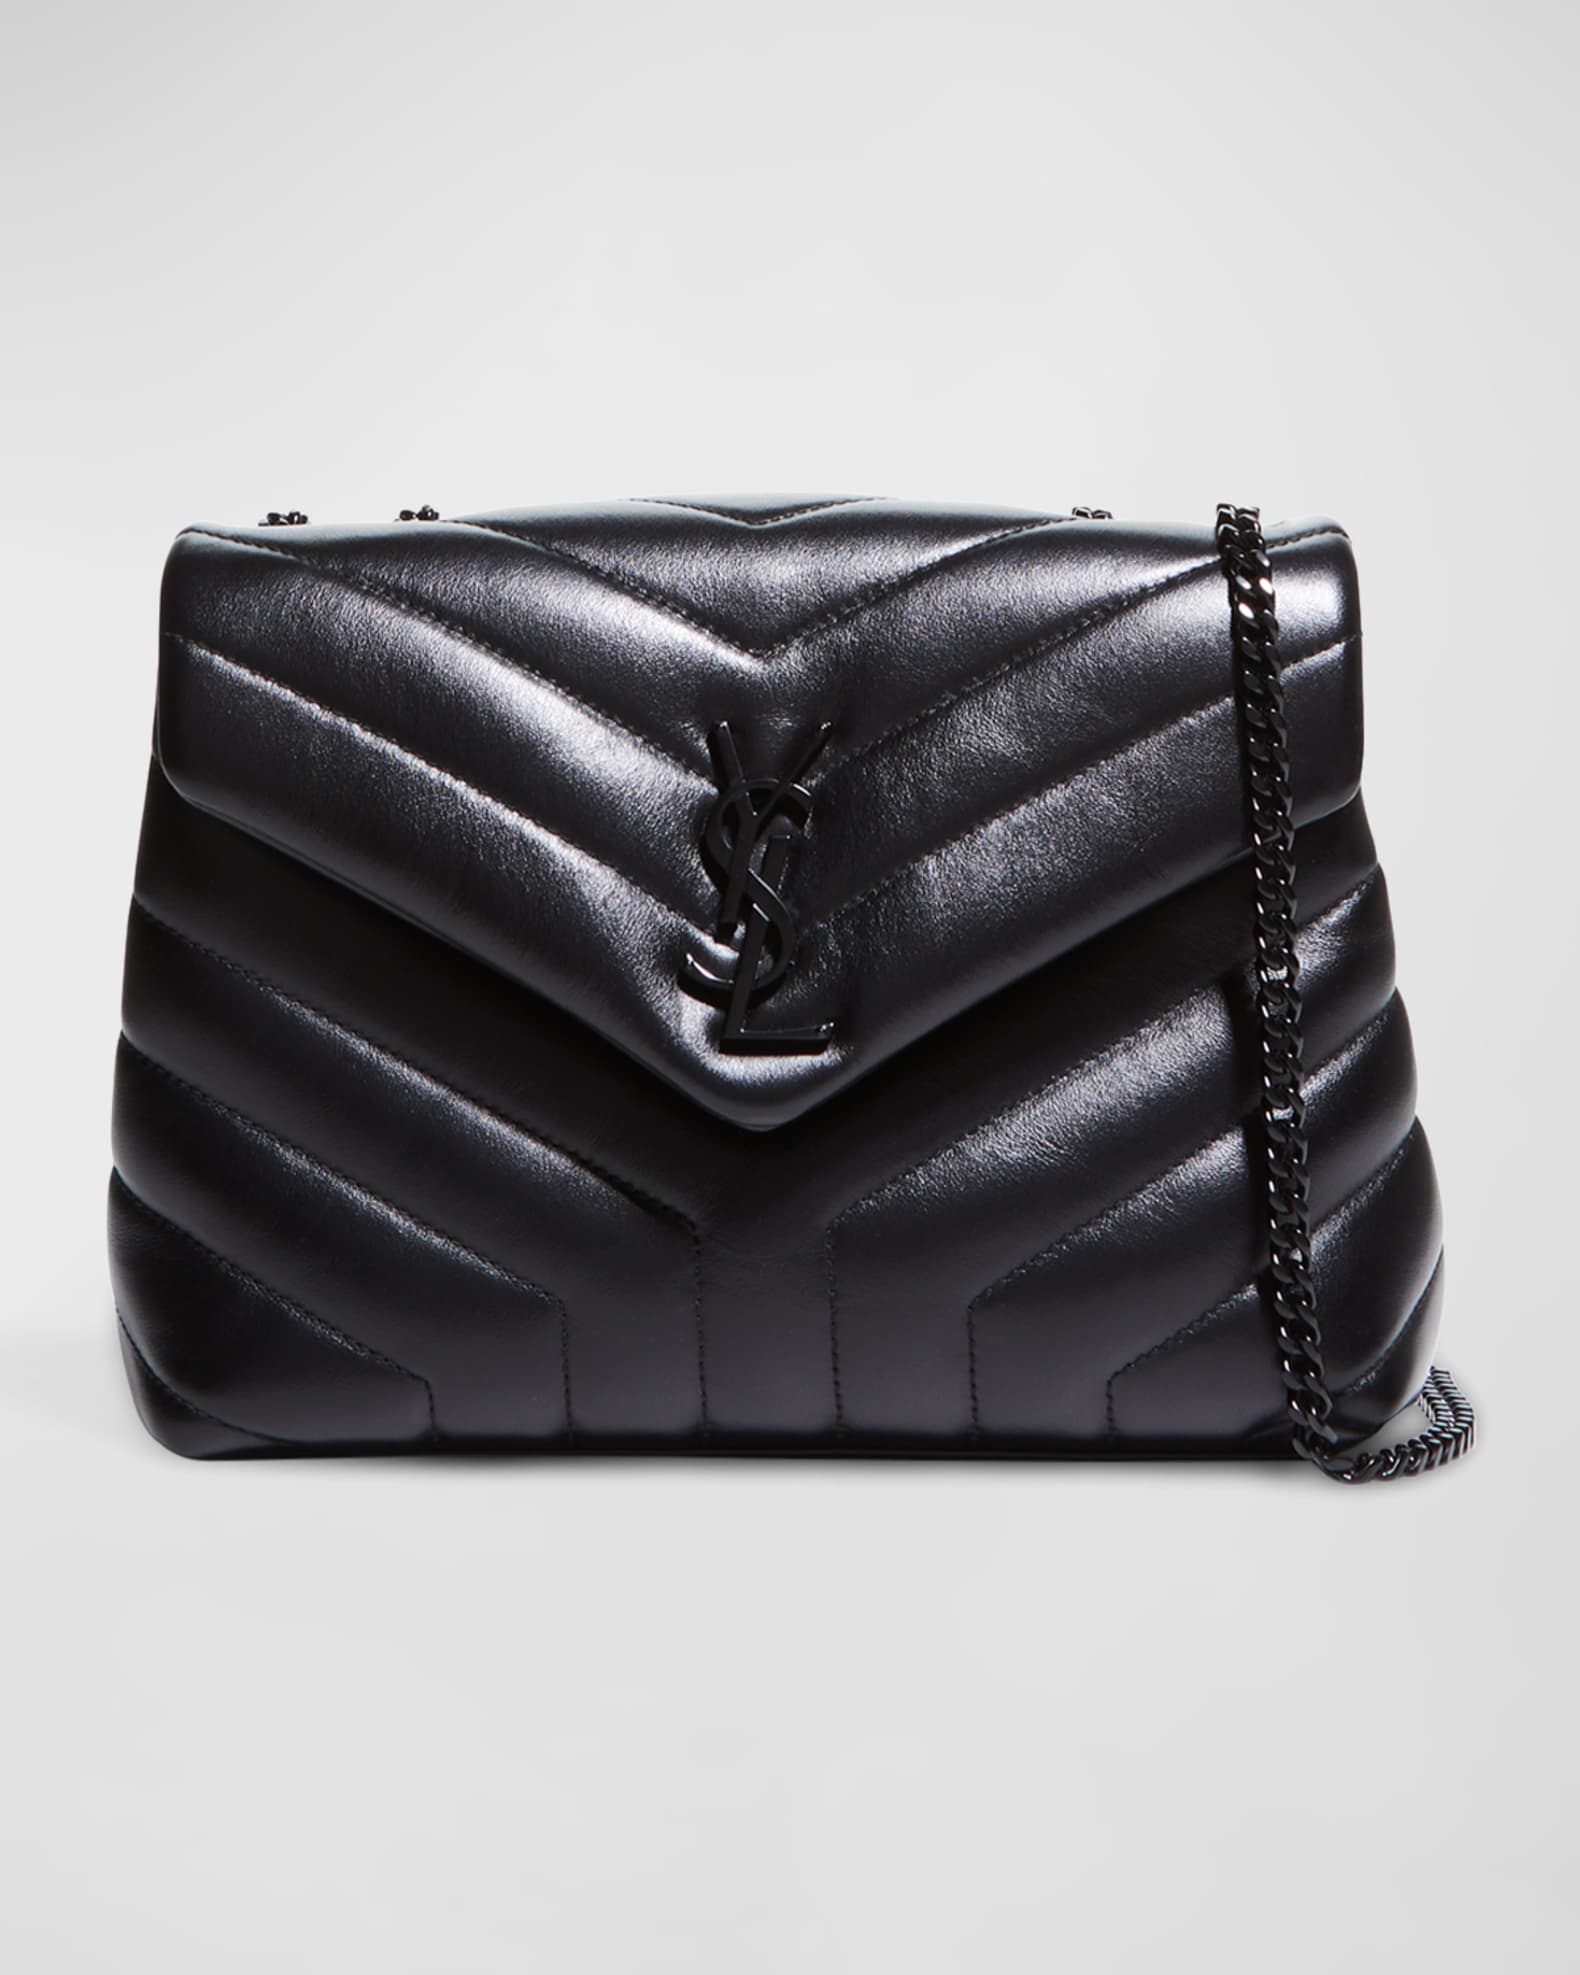 Saint Laurent Loulou Small YSL Shoulder Bag in Quilted Leather | Neiman ...